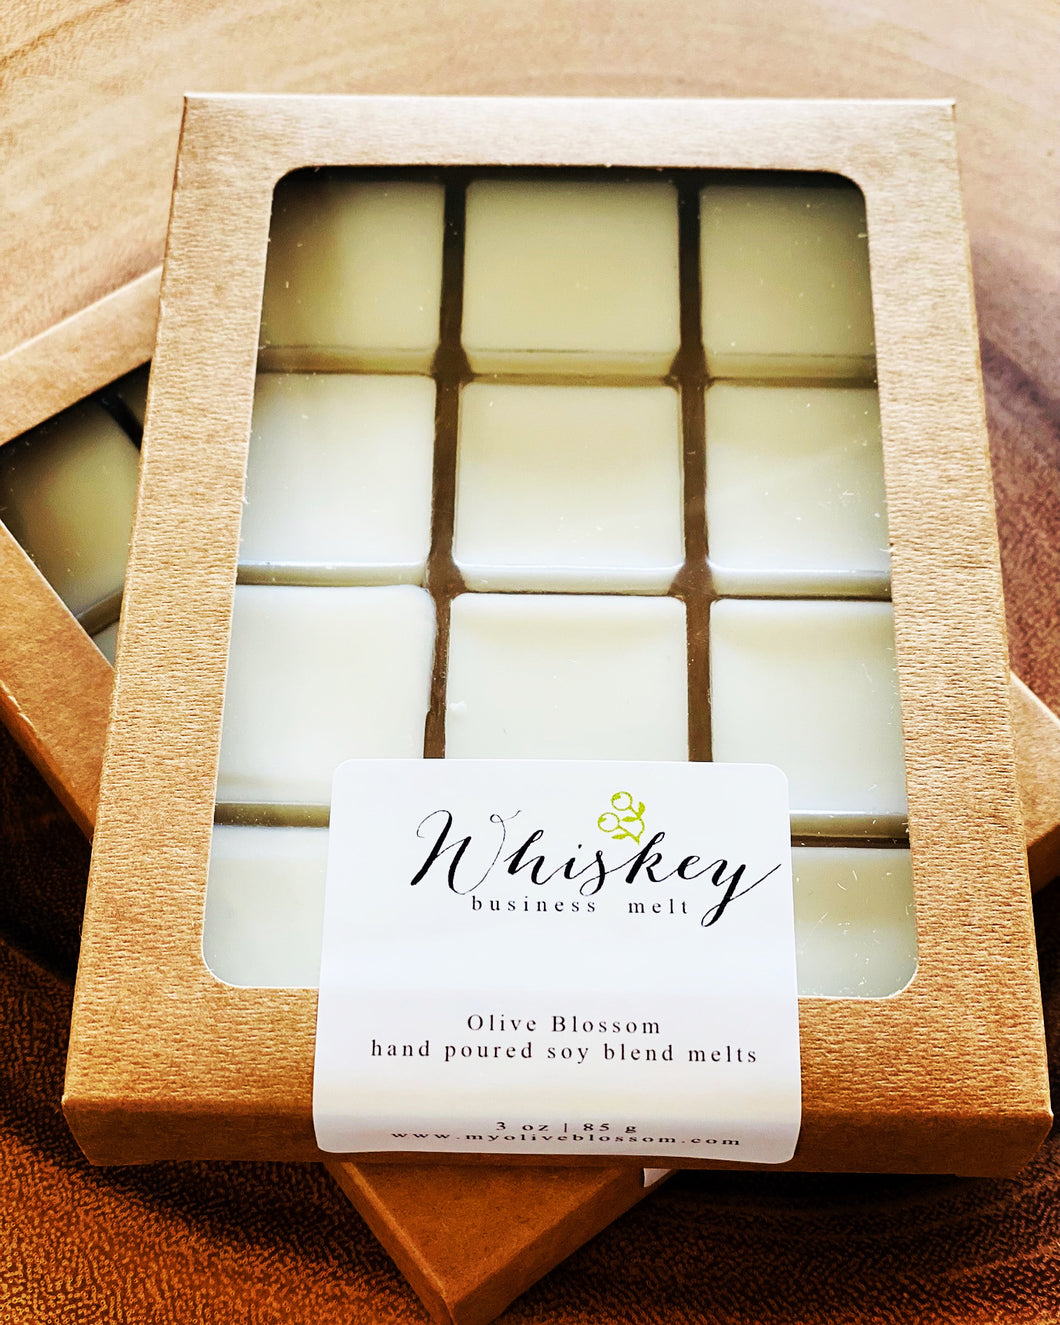 WHISKEY BUSINESS | 12 BLOSSOM MELTS IN A KRAFT BOX